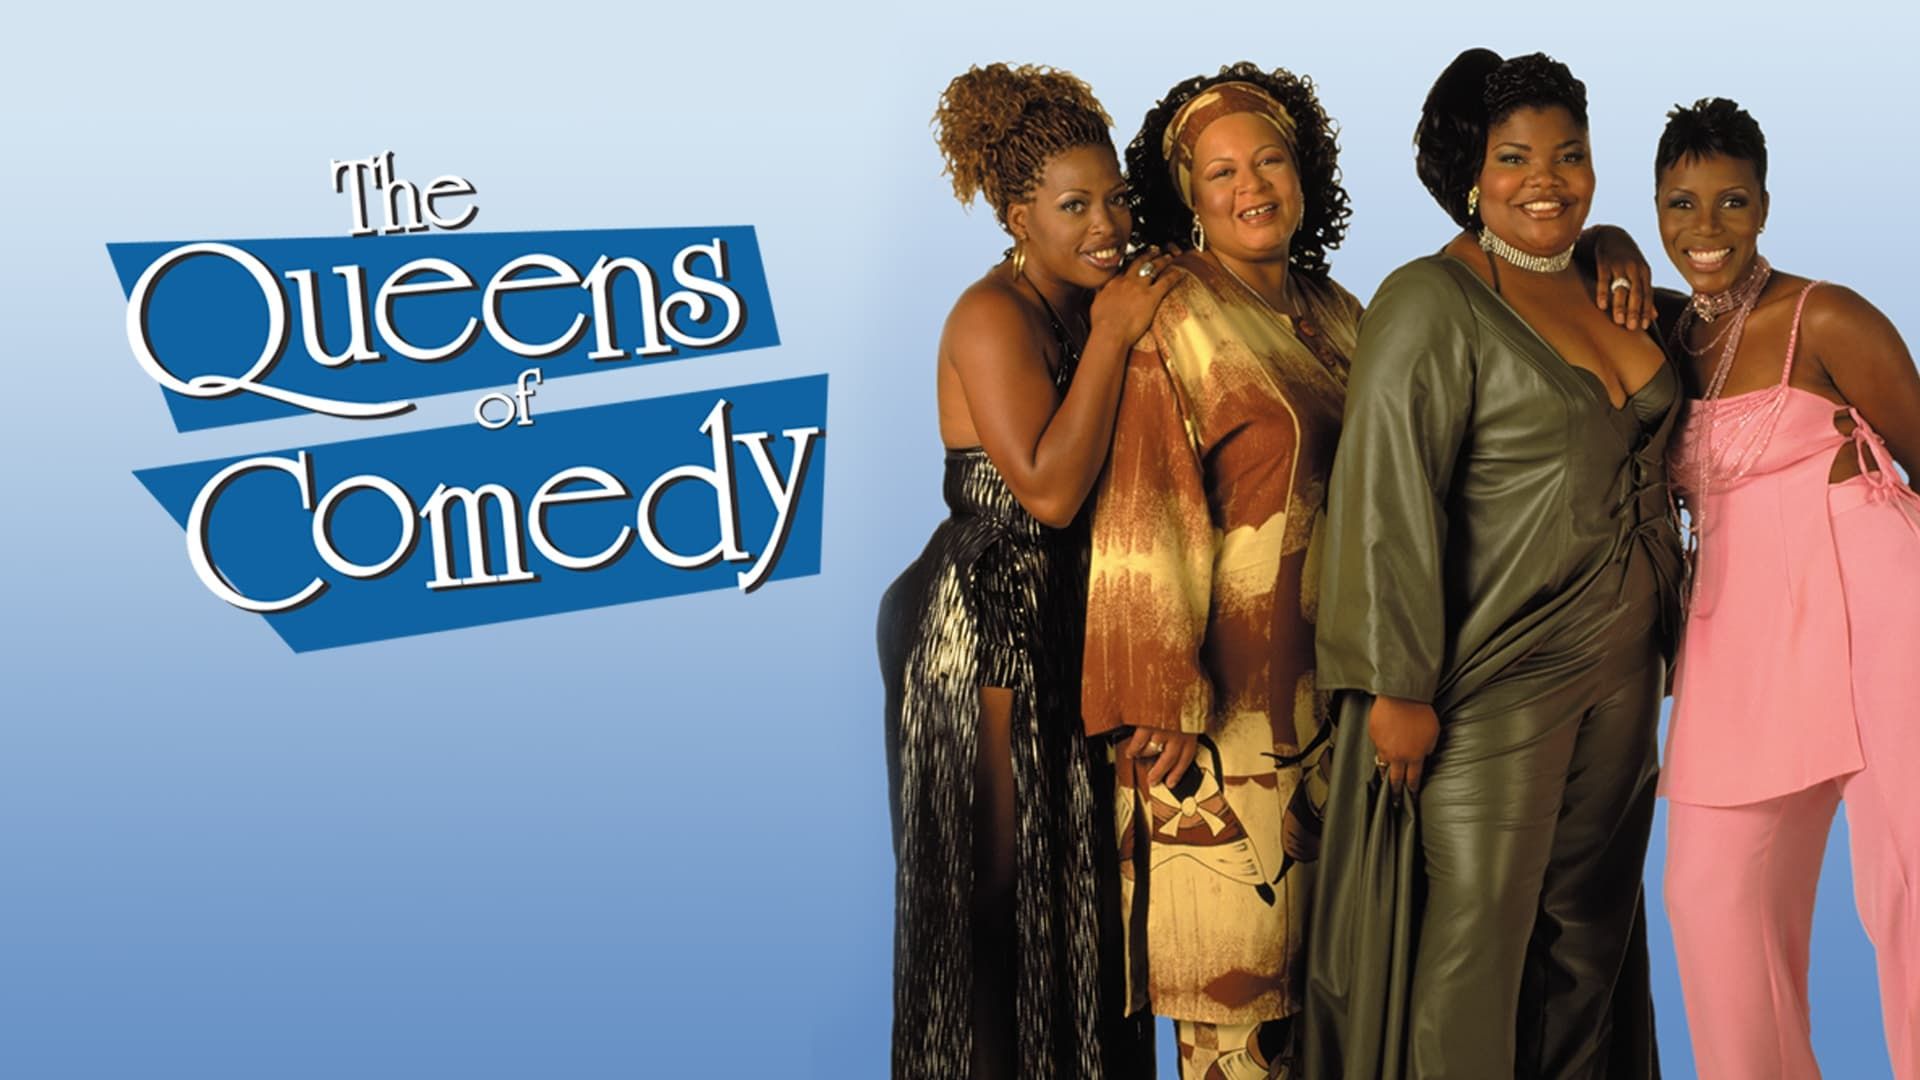 The Queens of Comedy background